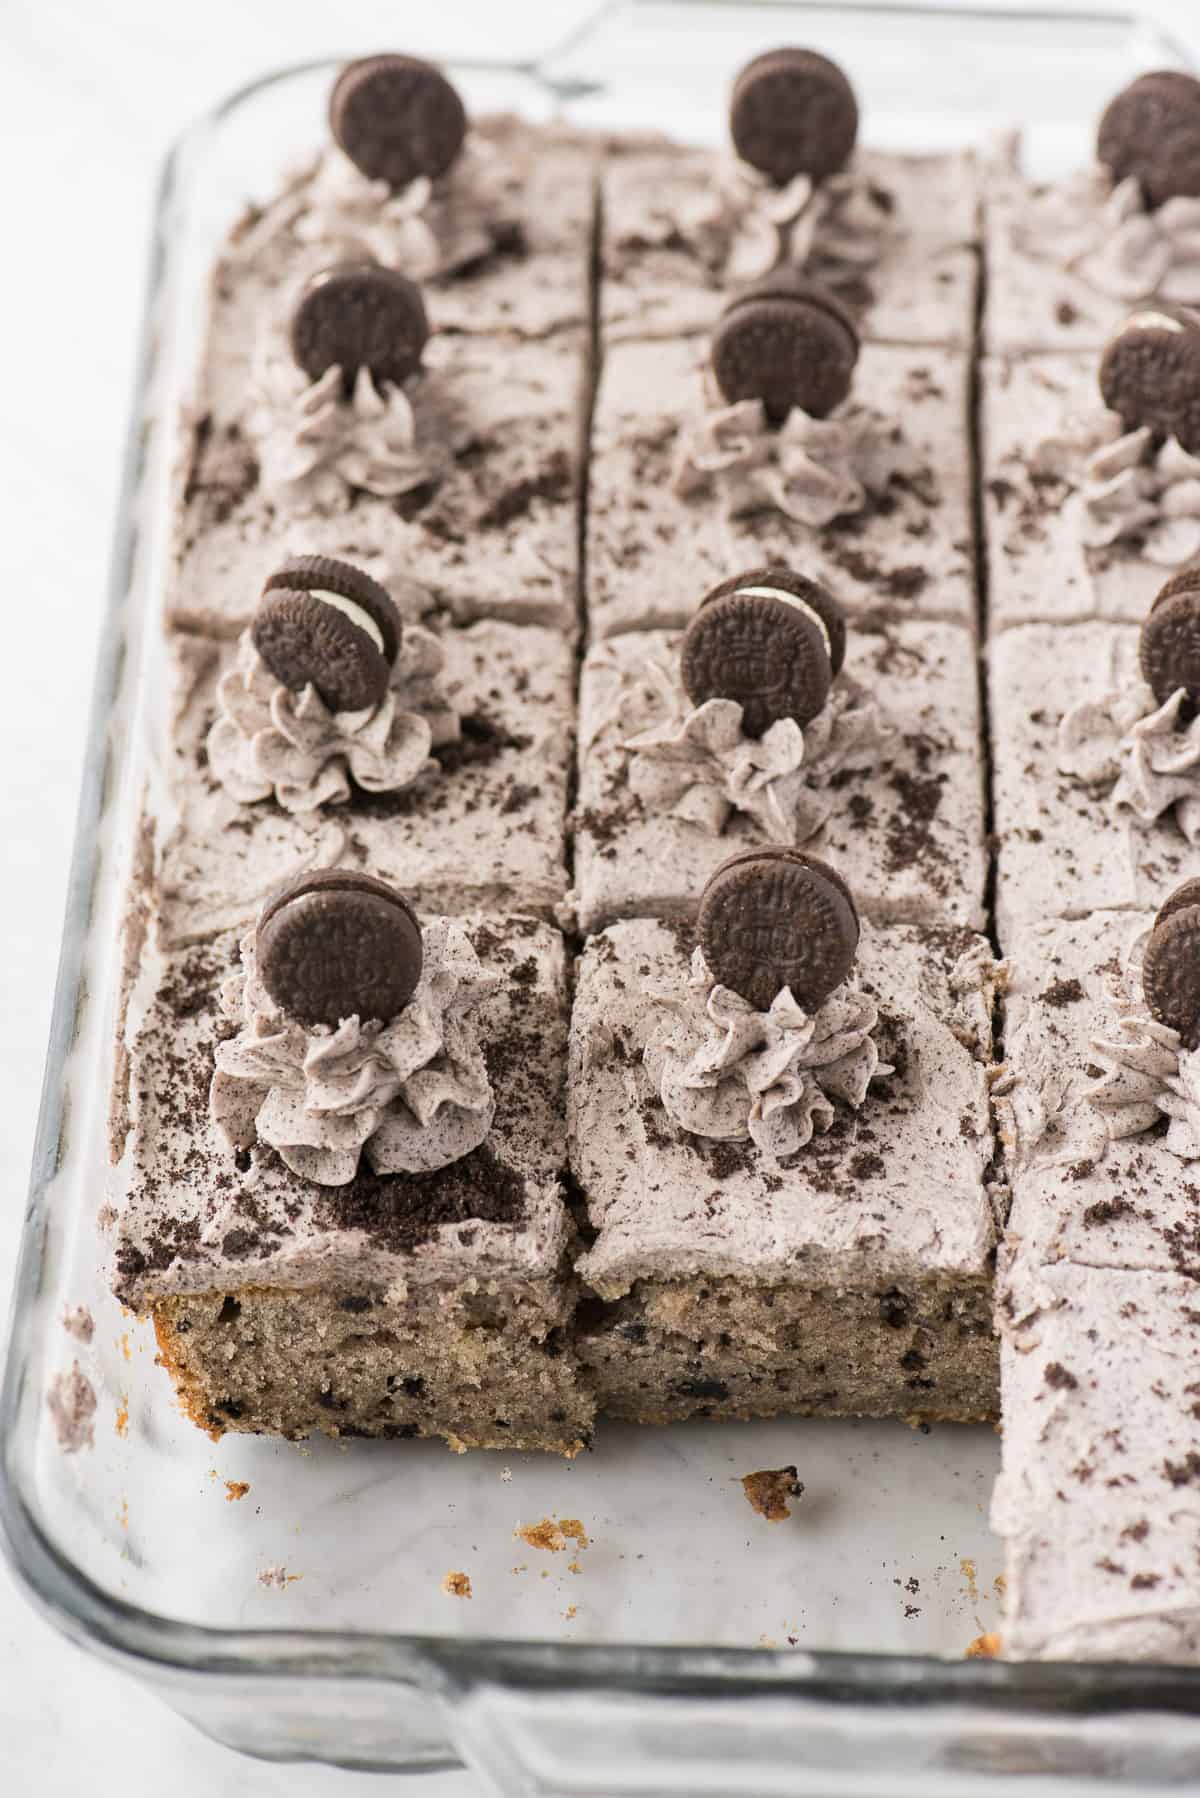 oreo cake cut into pieces in glass 9x13 inch pan